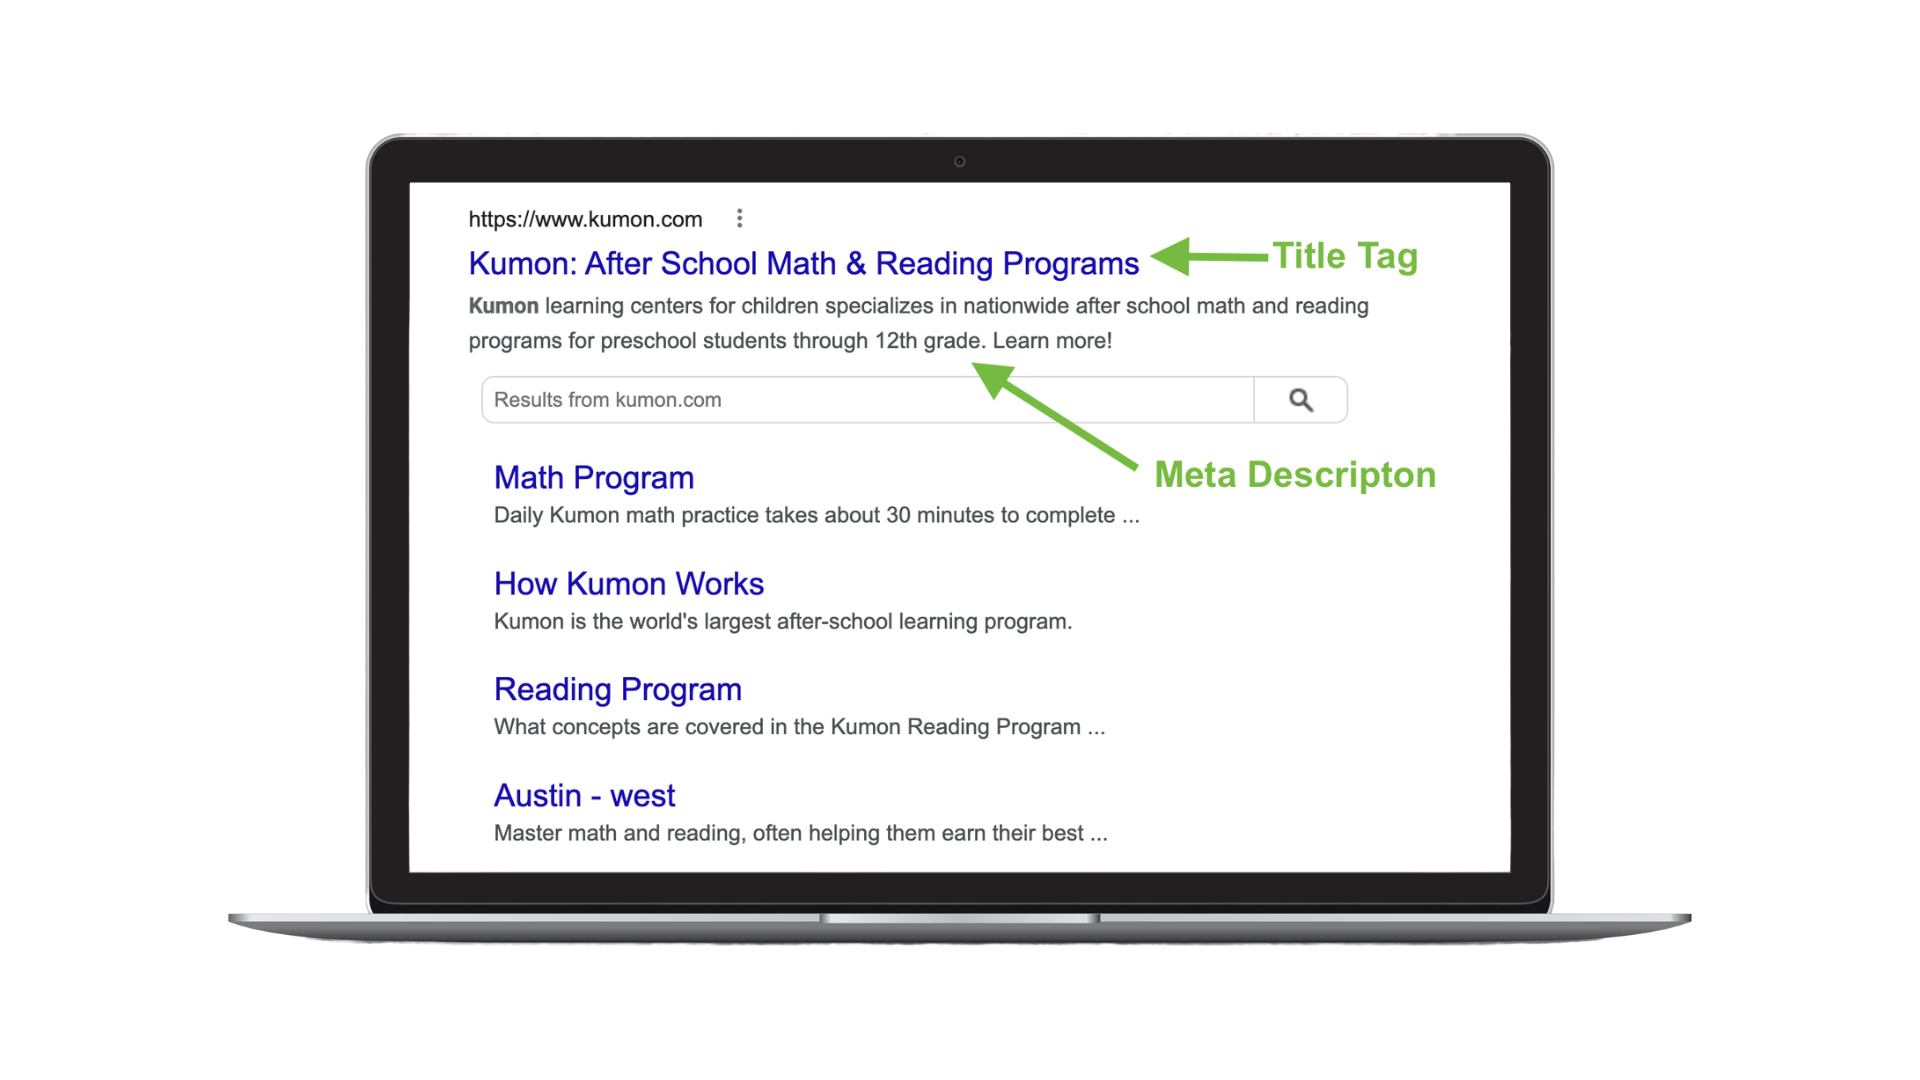 Example SERP of Kumon with green arrows and text pointing to the title tag and meta description